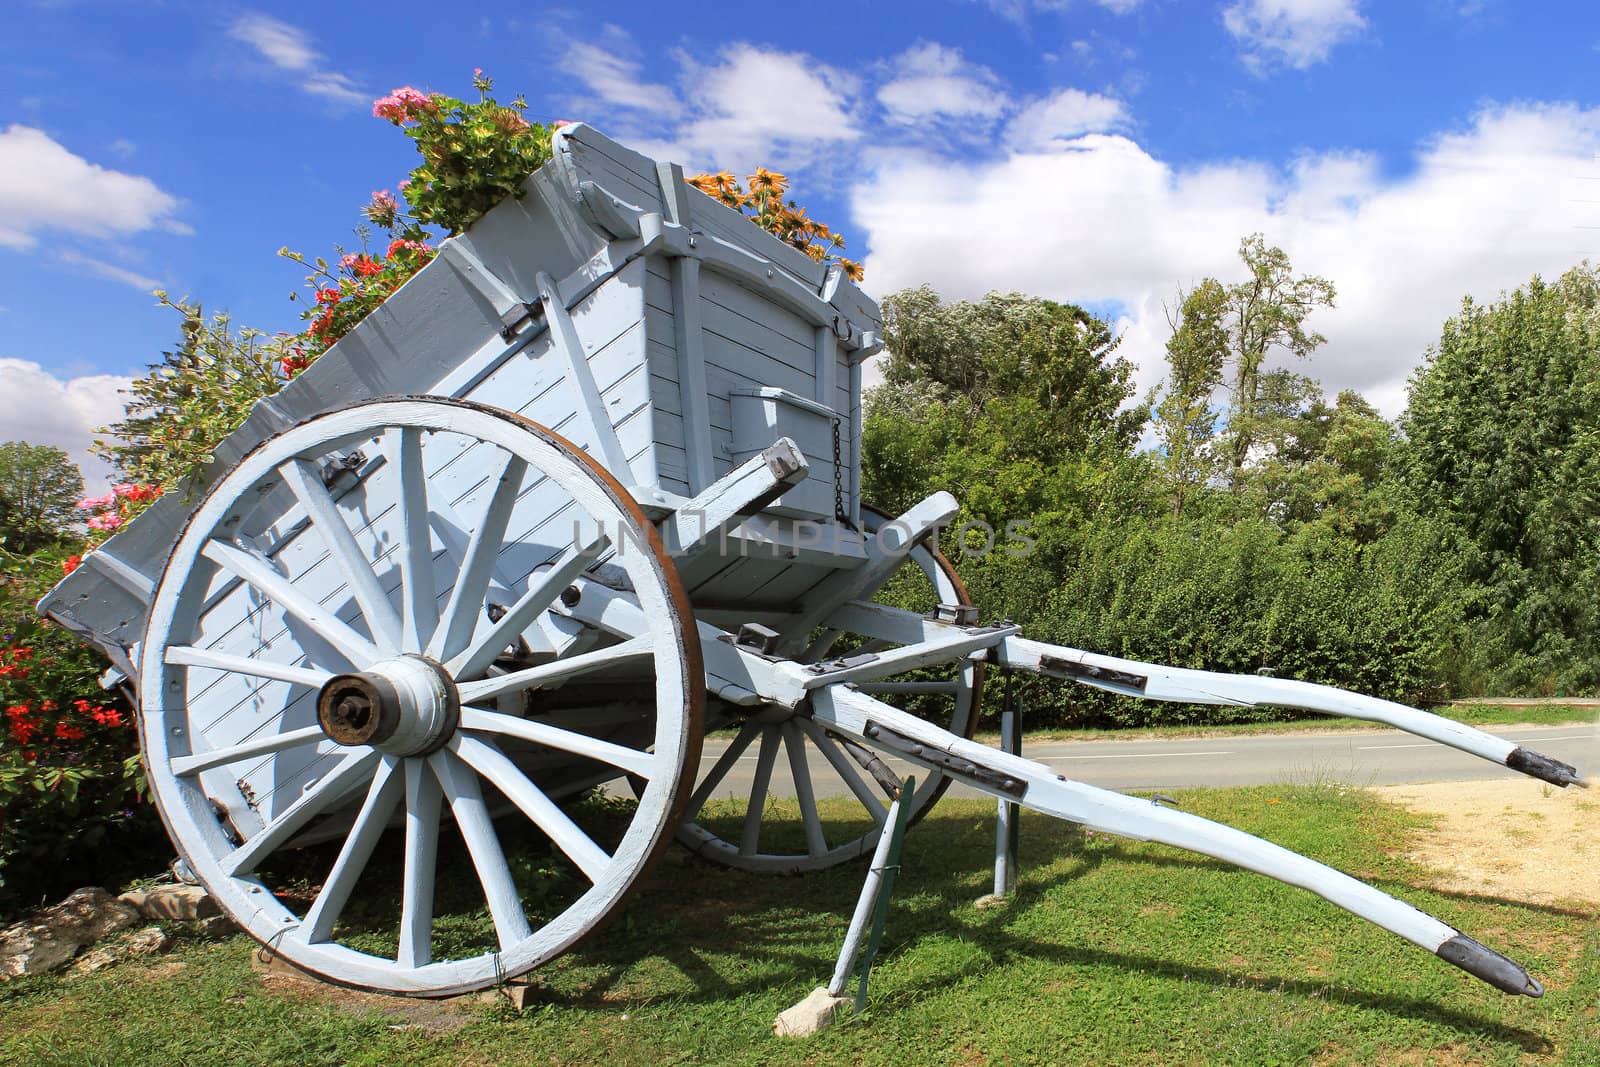 A cart for agriculture with flowers